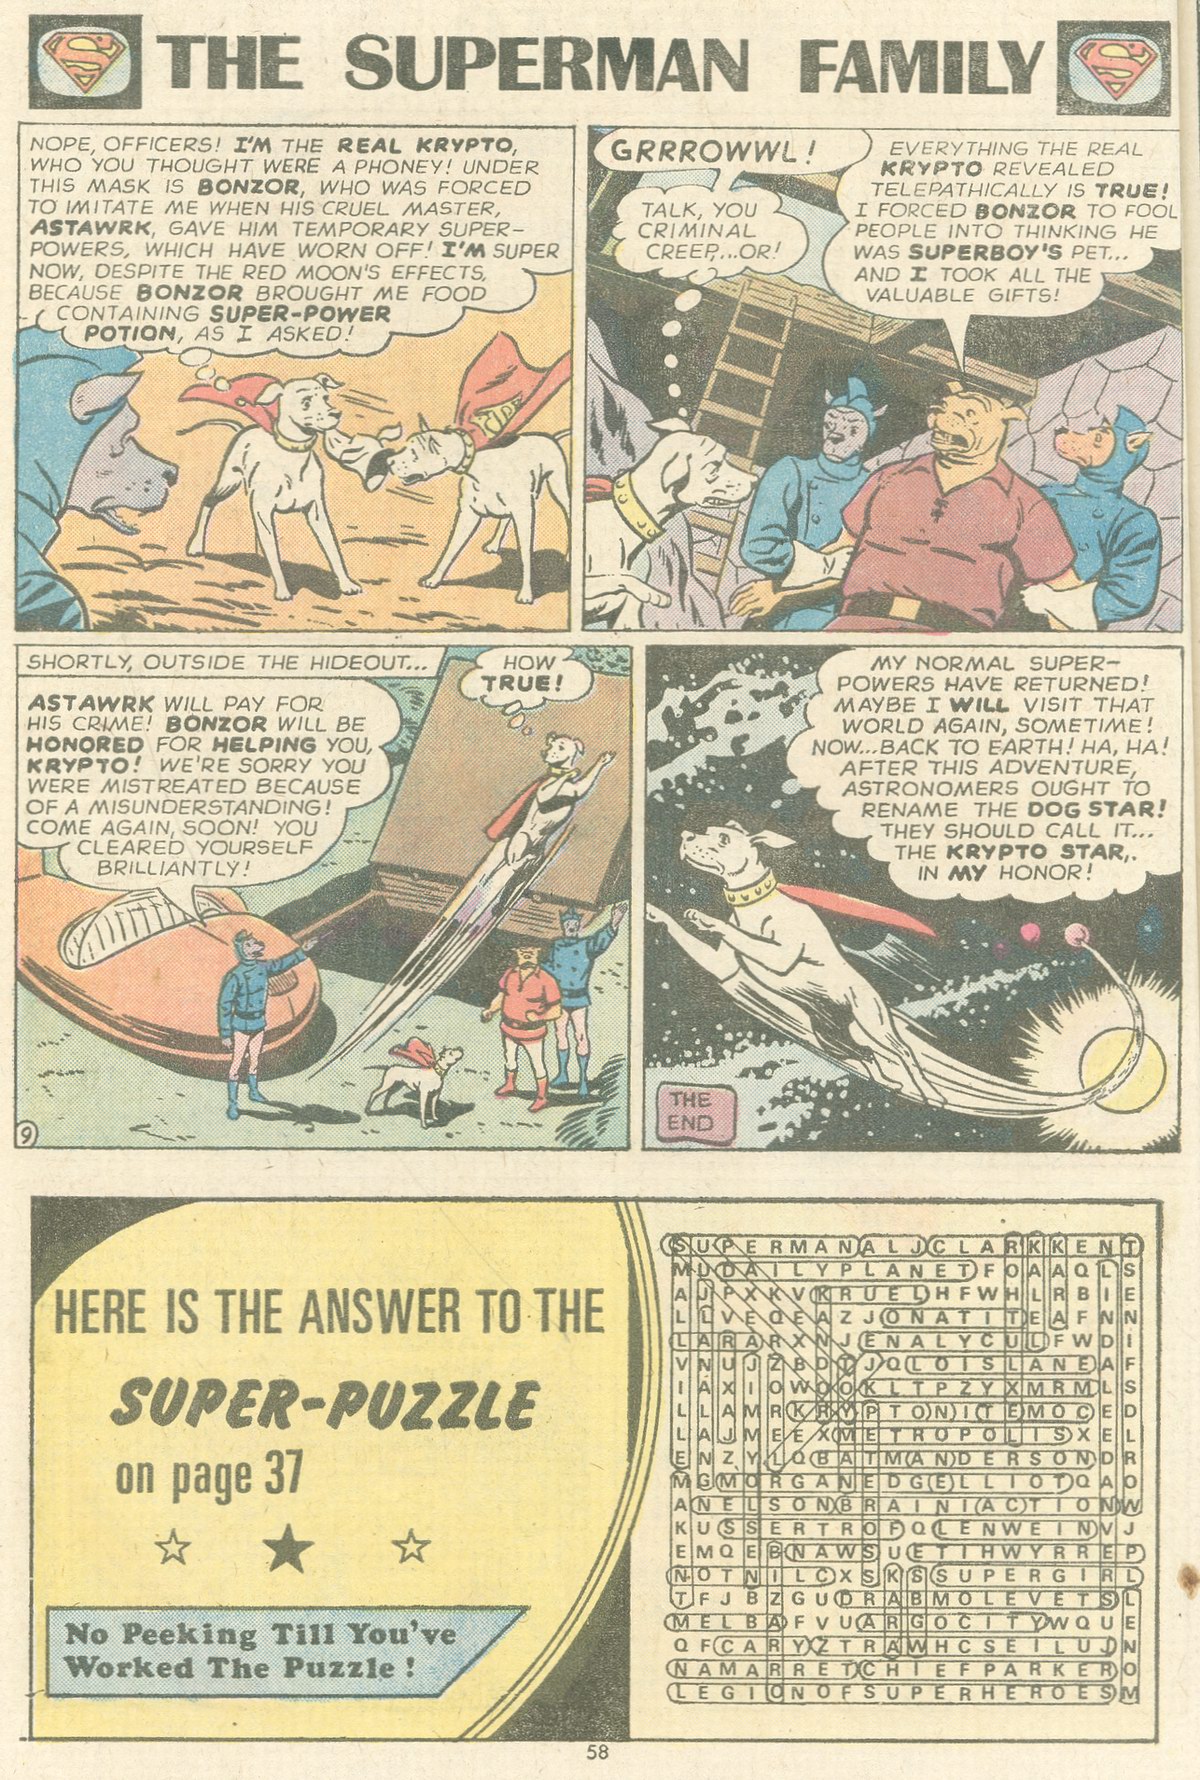 The Superman Family 168 Page 58